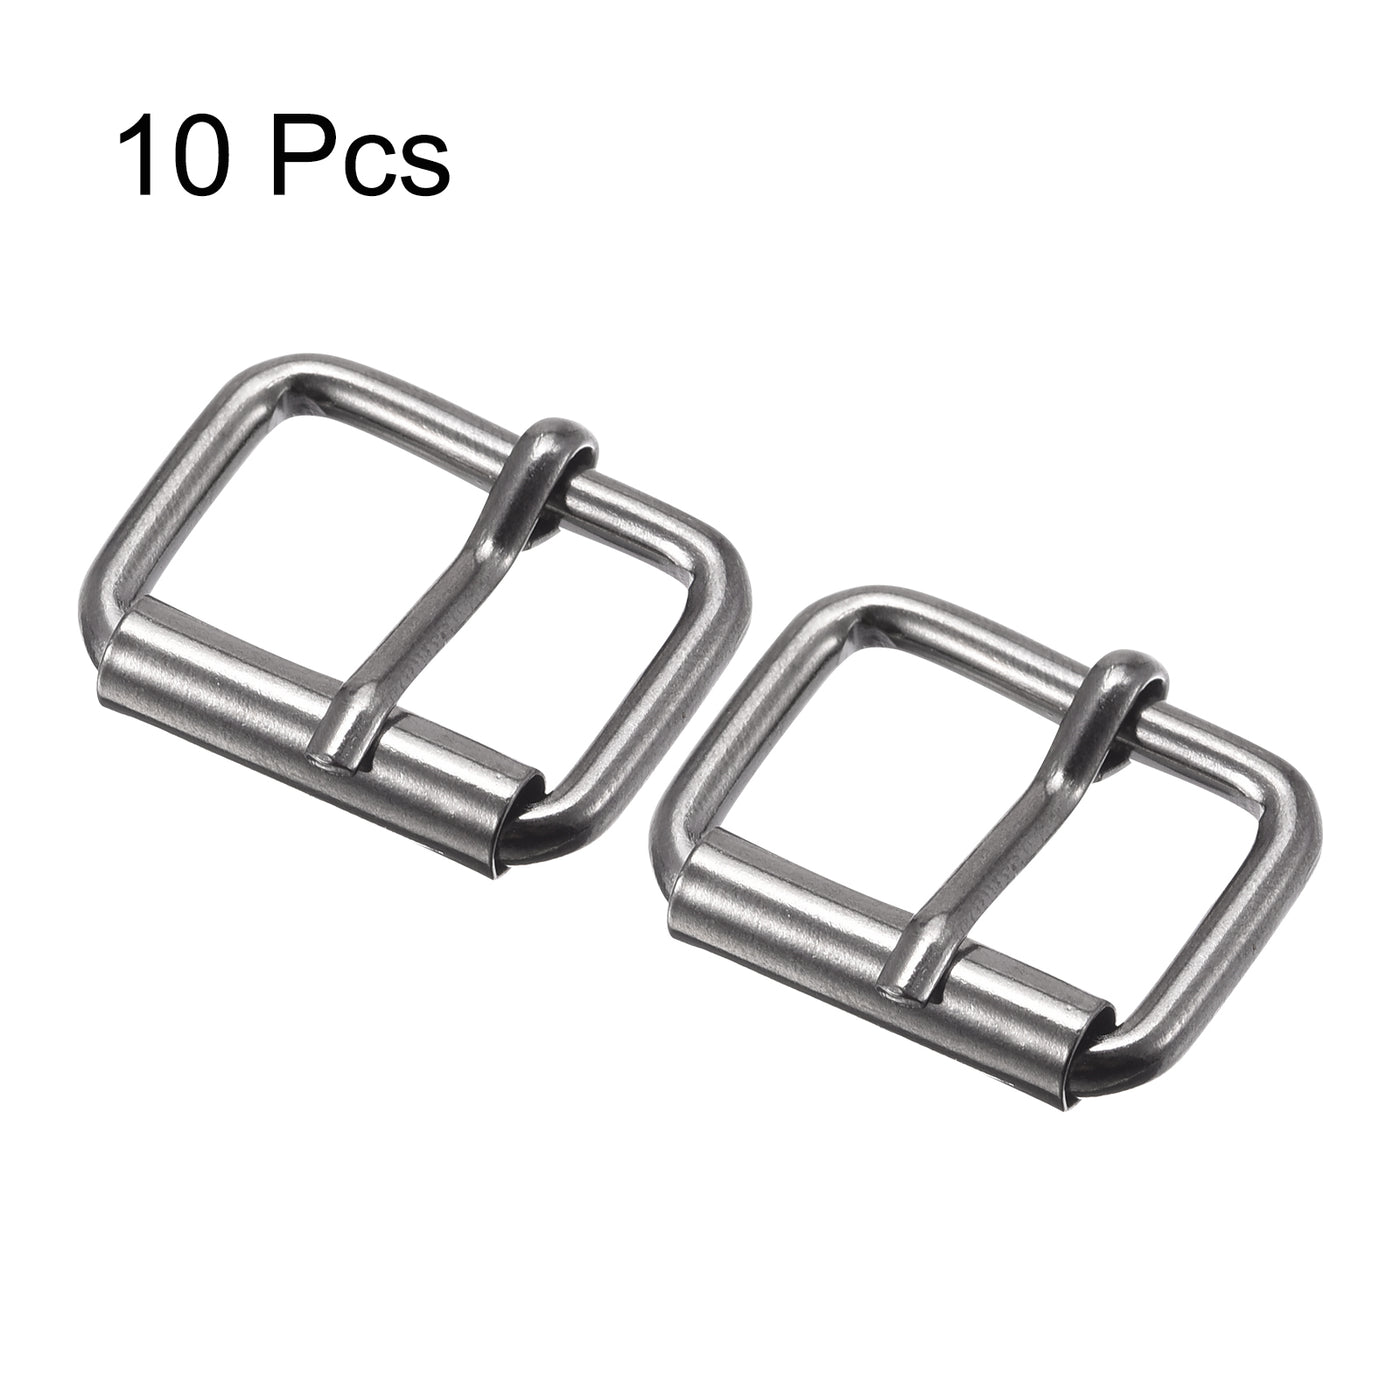 uxcell Uxcell 20mm(0.79") Metal Roller Buckles for Belts Bags Straps DIY Dark Gray 10pcs